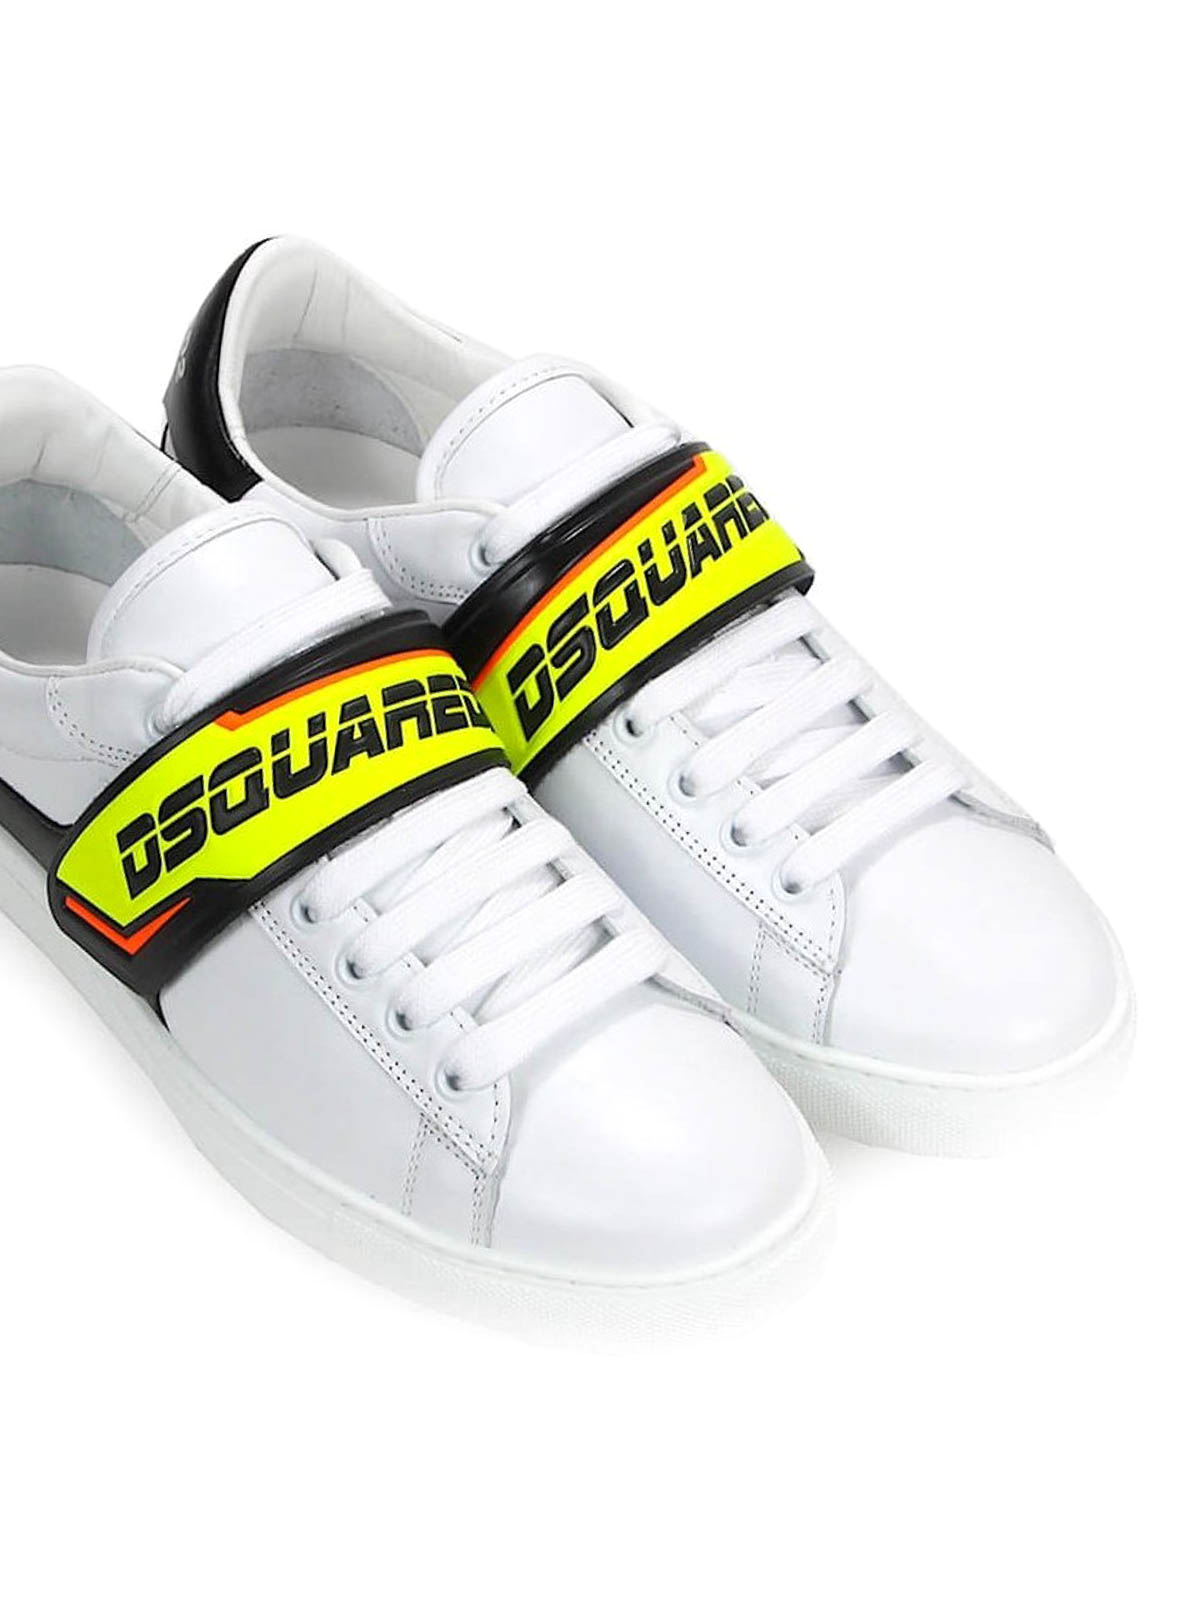 dsquared2 running shoes